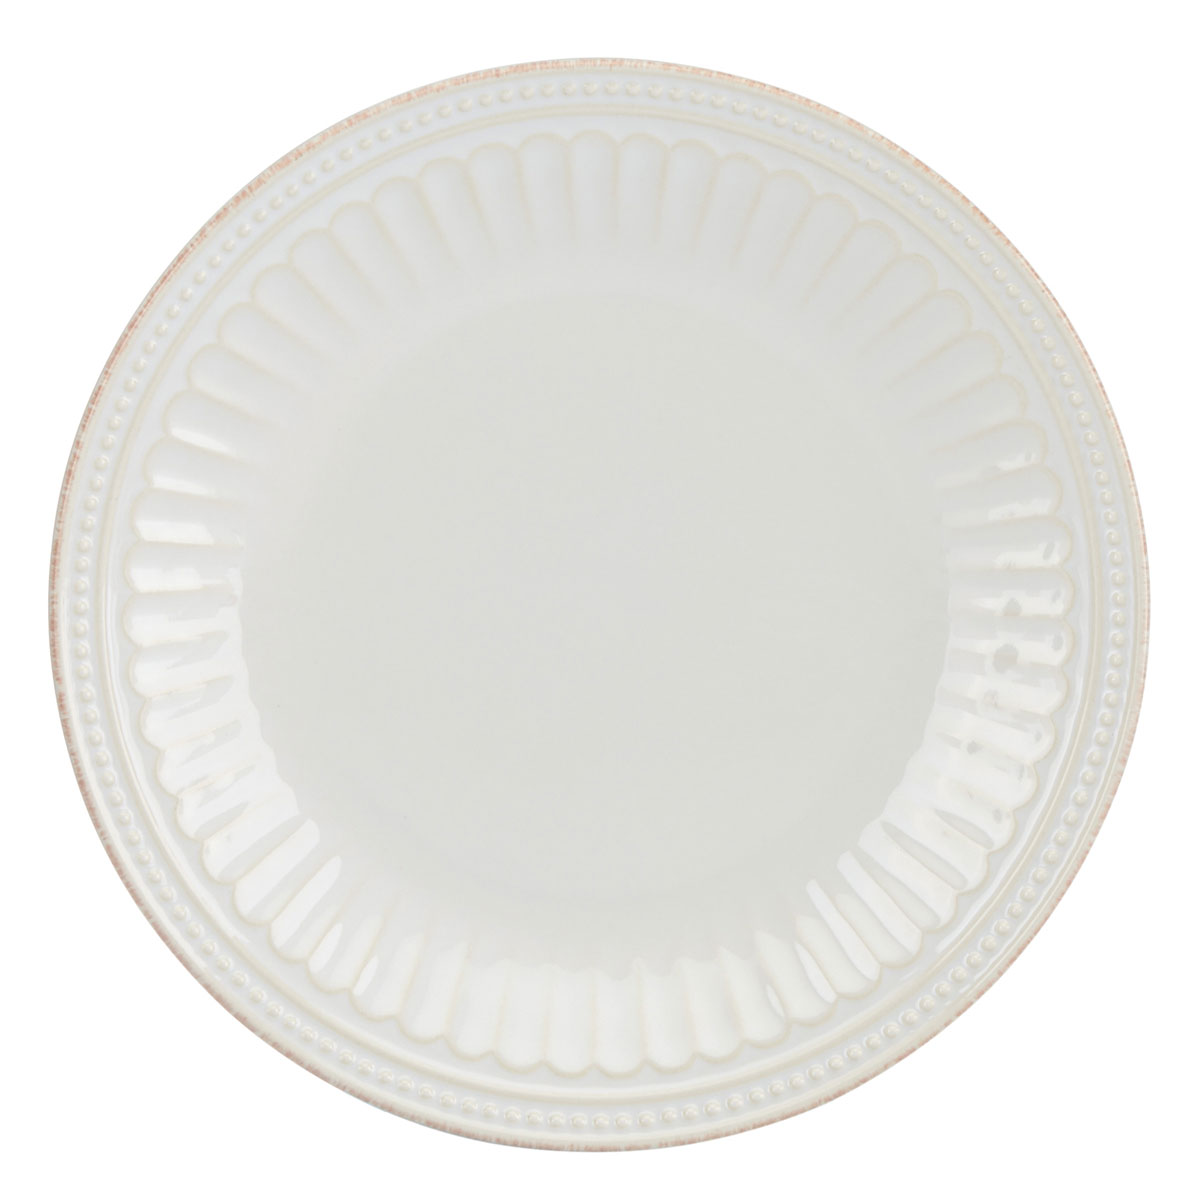 Lenox French Perle Groove White China Accent Plate, Single